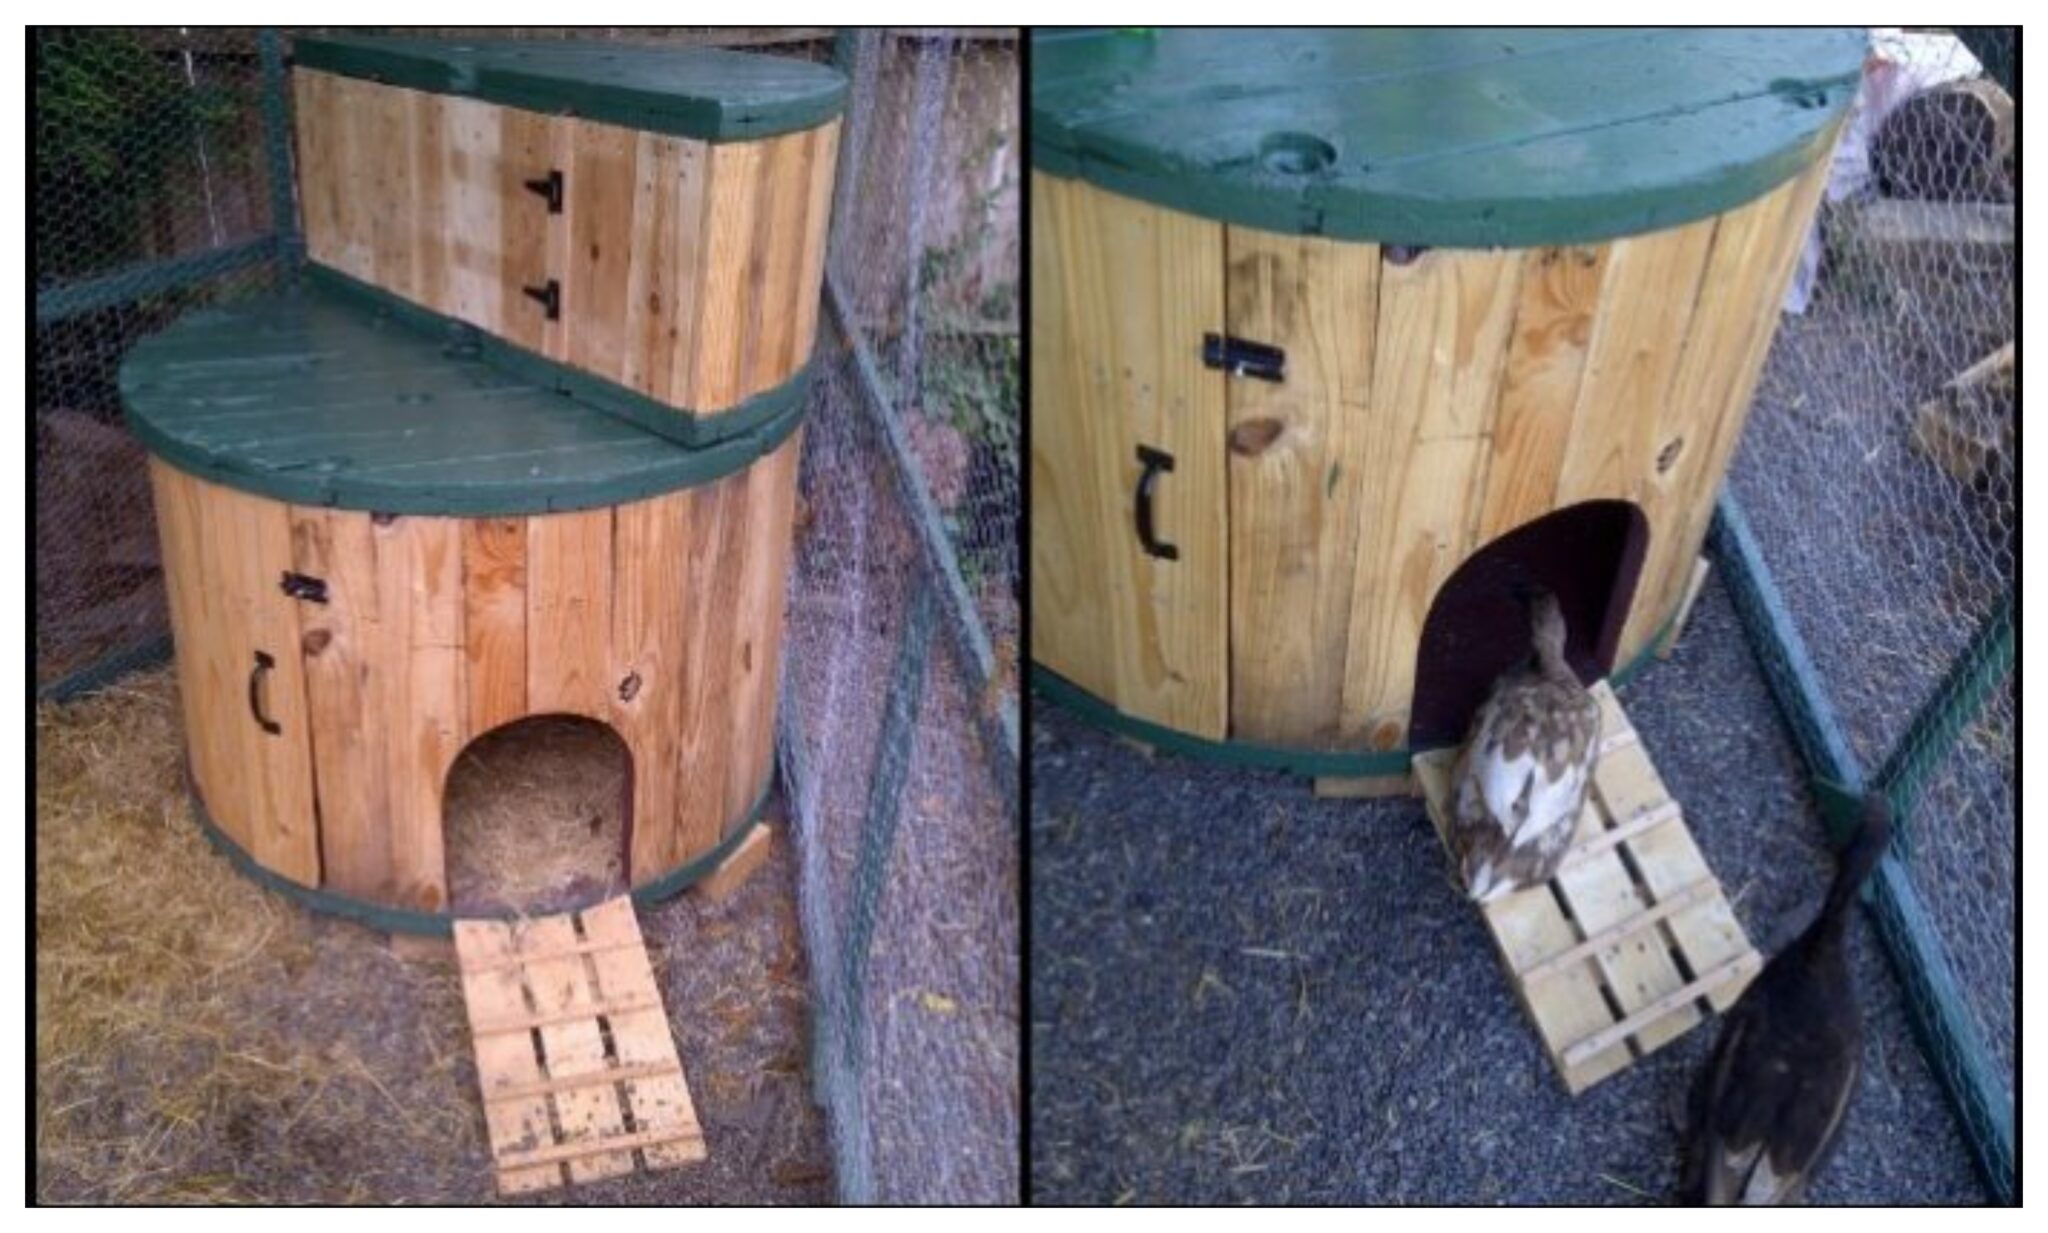 https://project.theownerbuildernetwork.co/files/2022/09/Cable-Spool-Duck-House-Main-Image-696x418-1-scaled.jpg